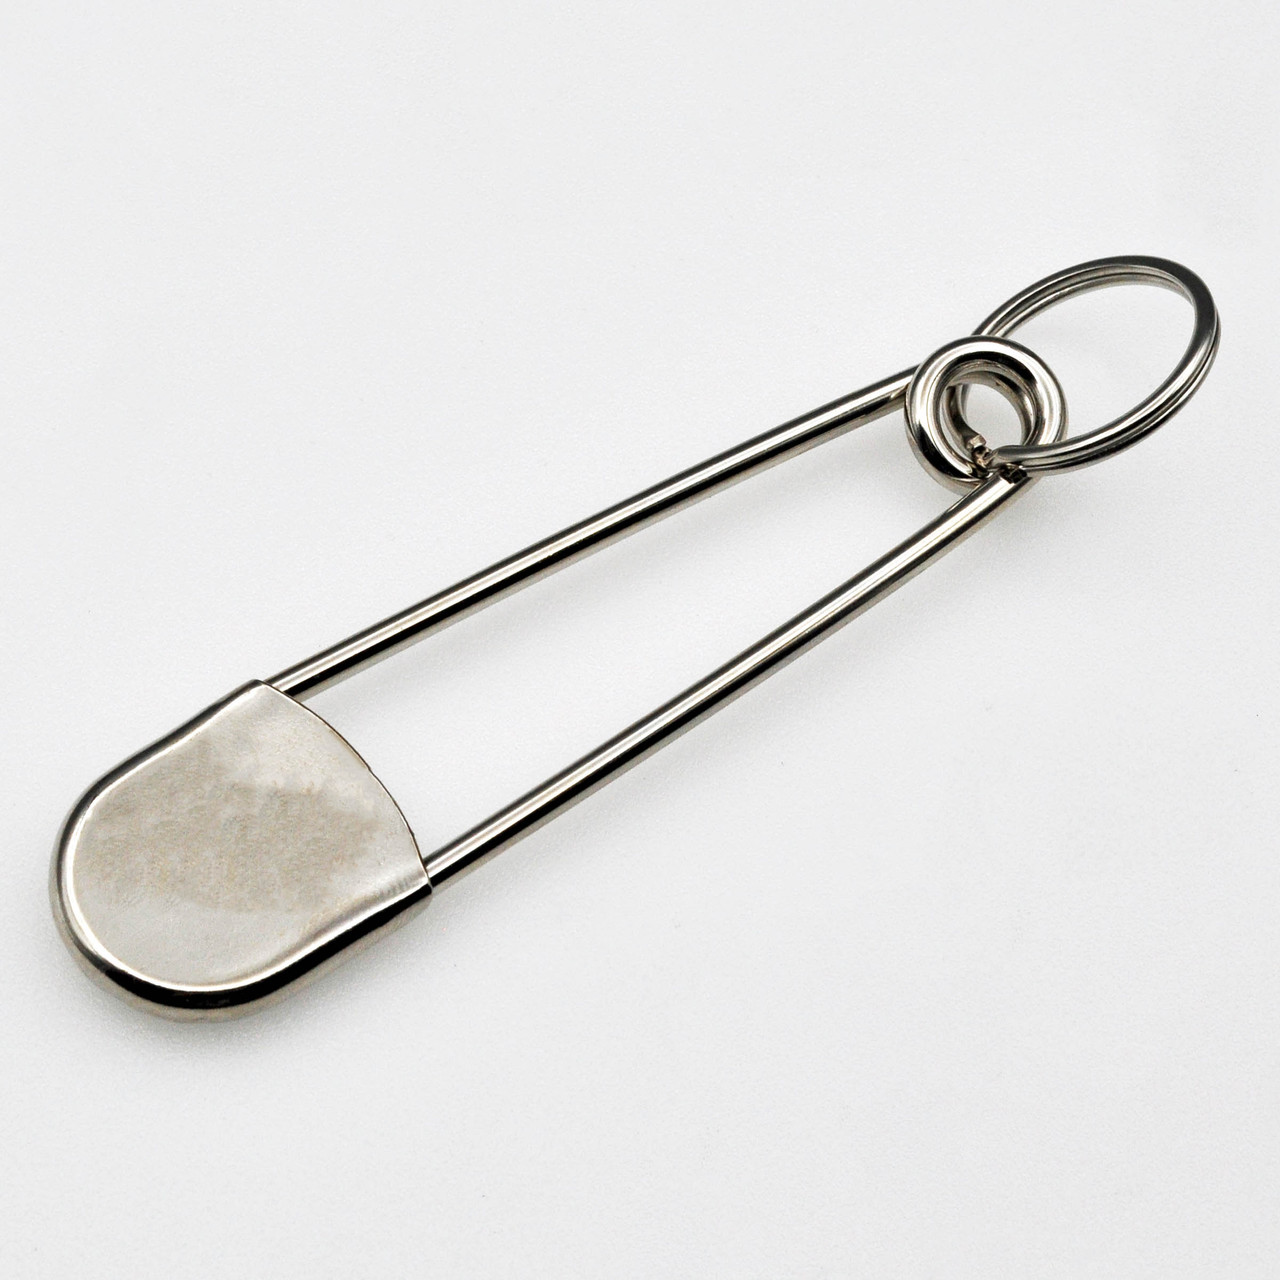 large safety pin (great for a key holder?) - tools - by owner - sale -  craigslist